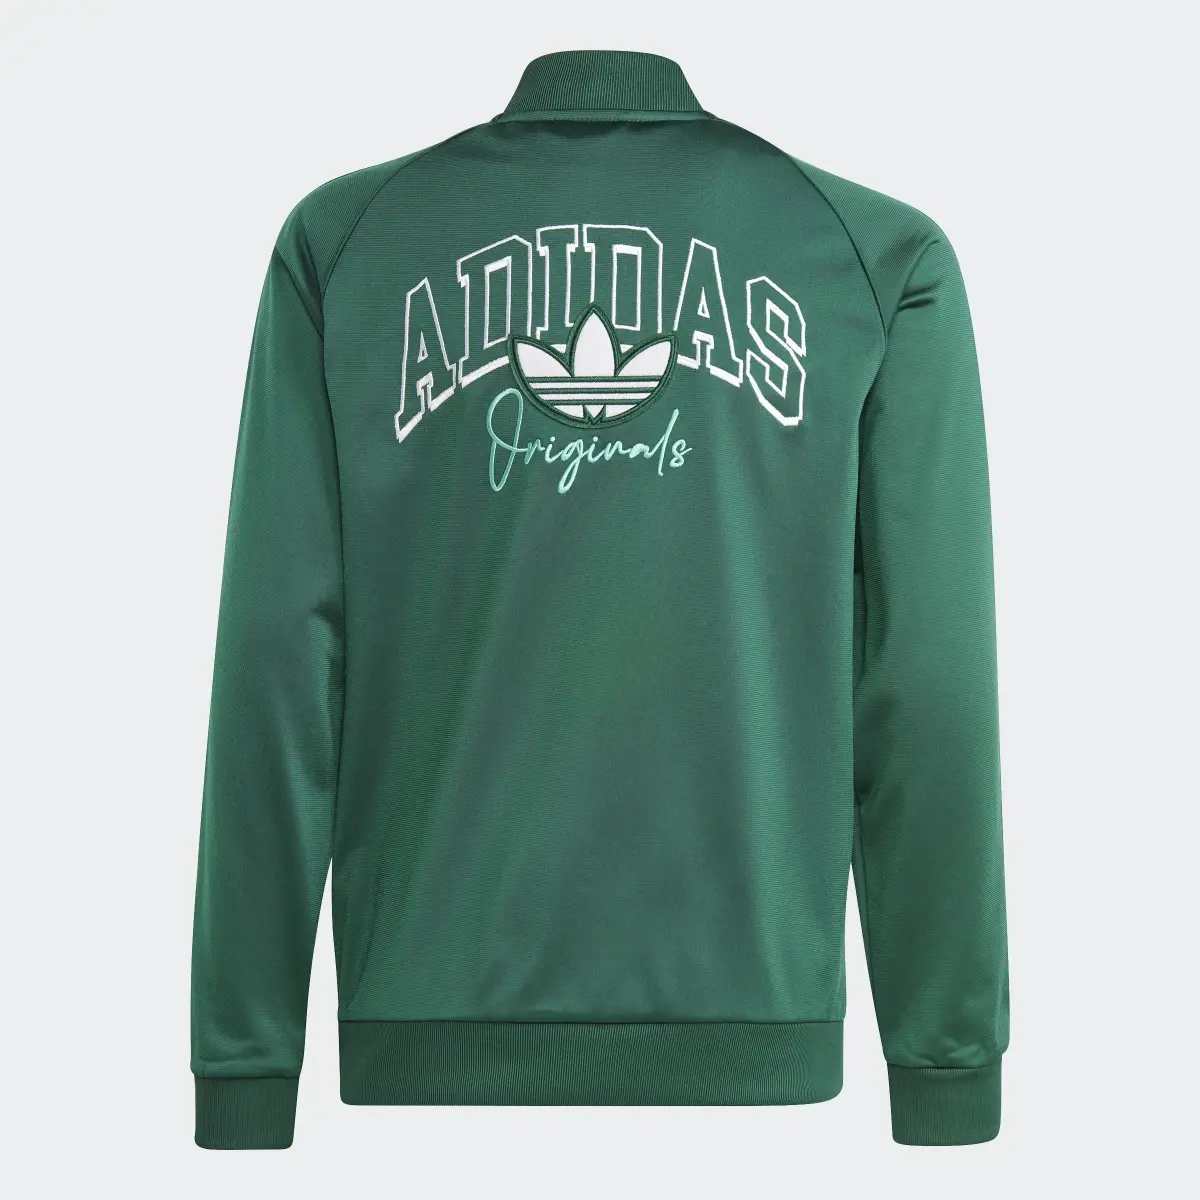 Adidas Collegiate Graphic Pack SST Track Top. 2